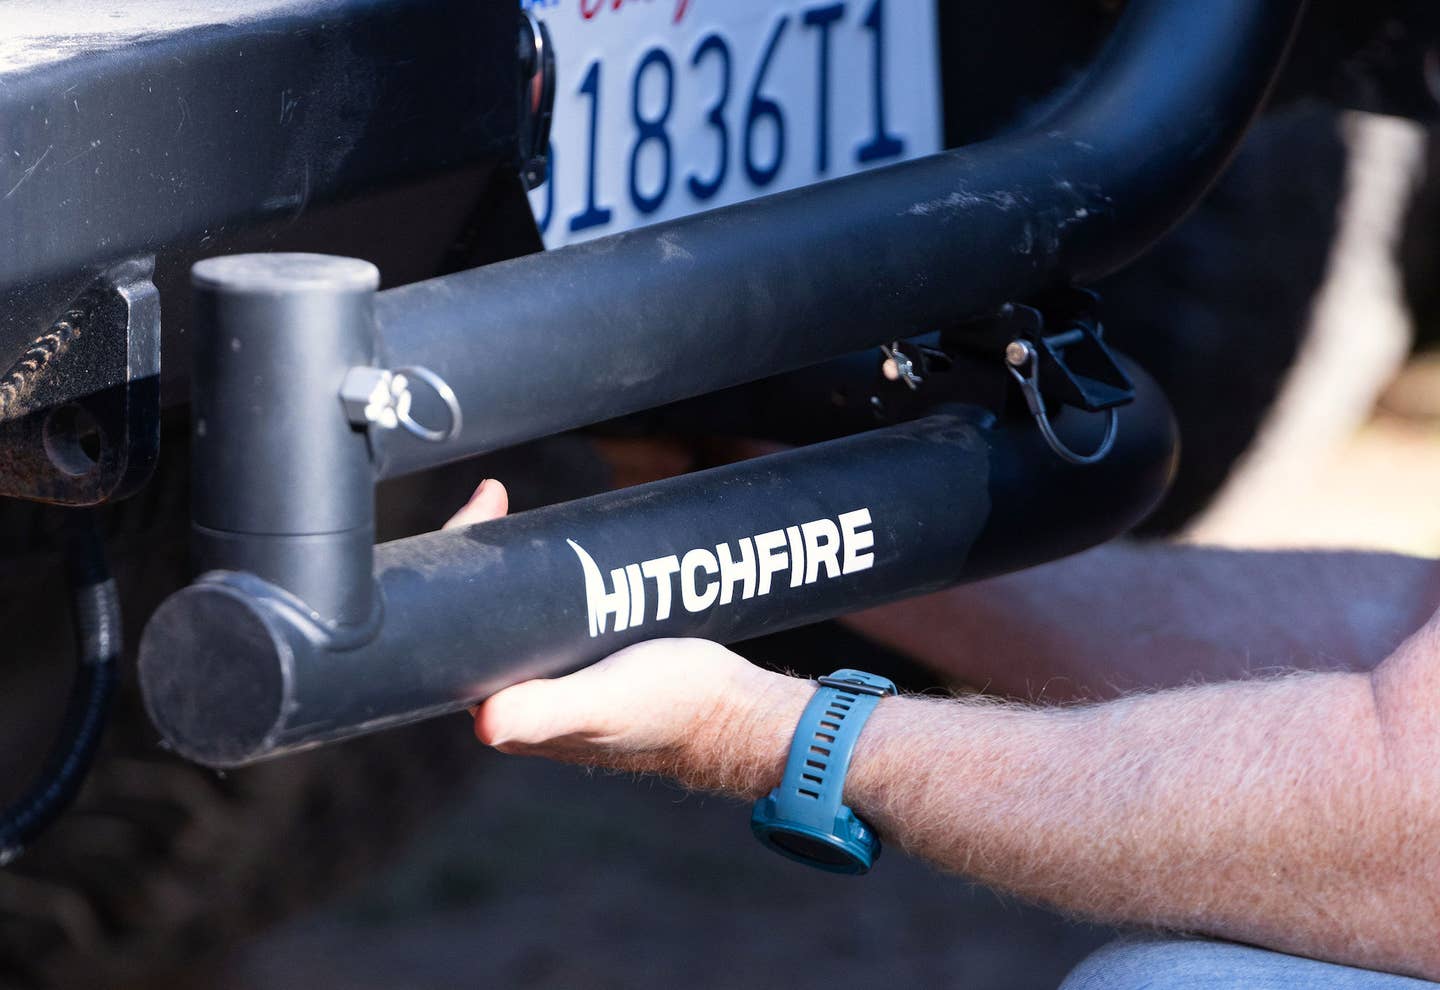 Hitchfire tailgate grilling products